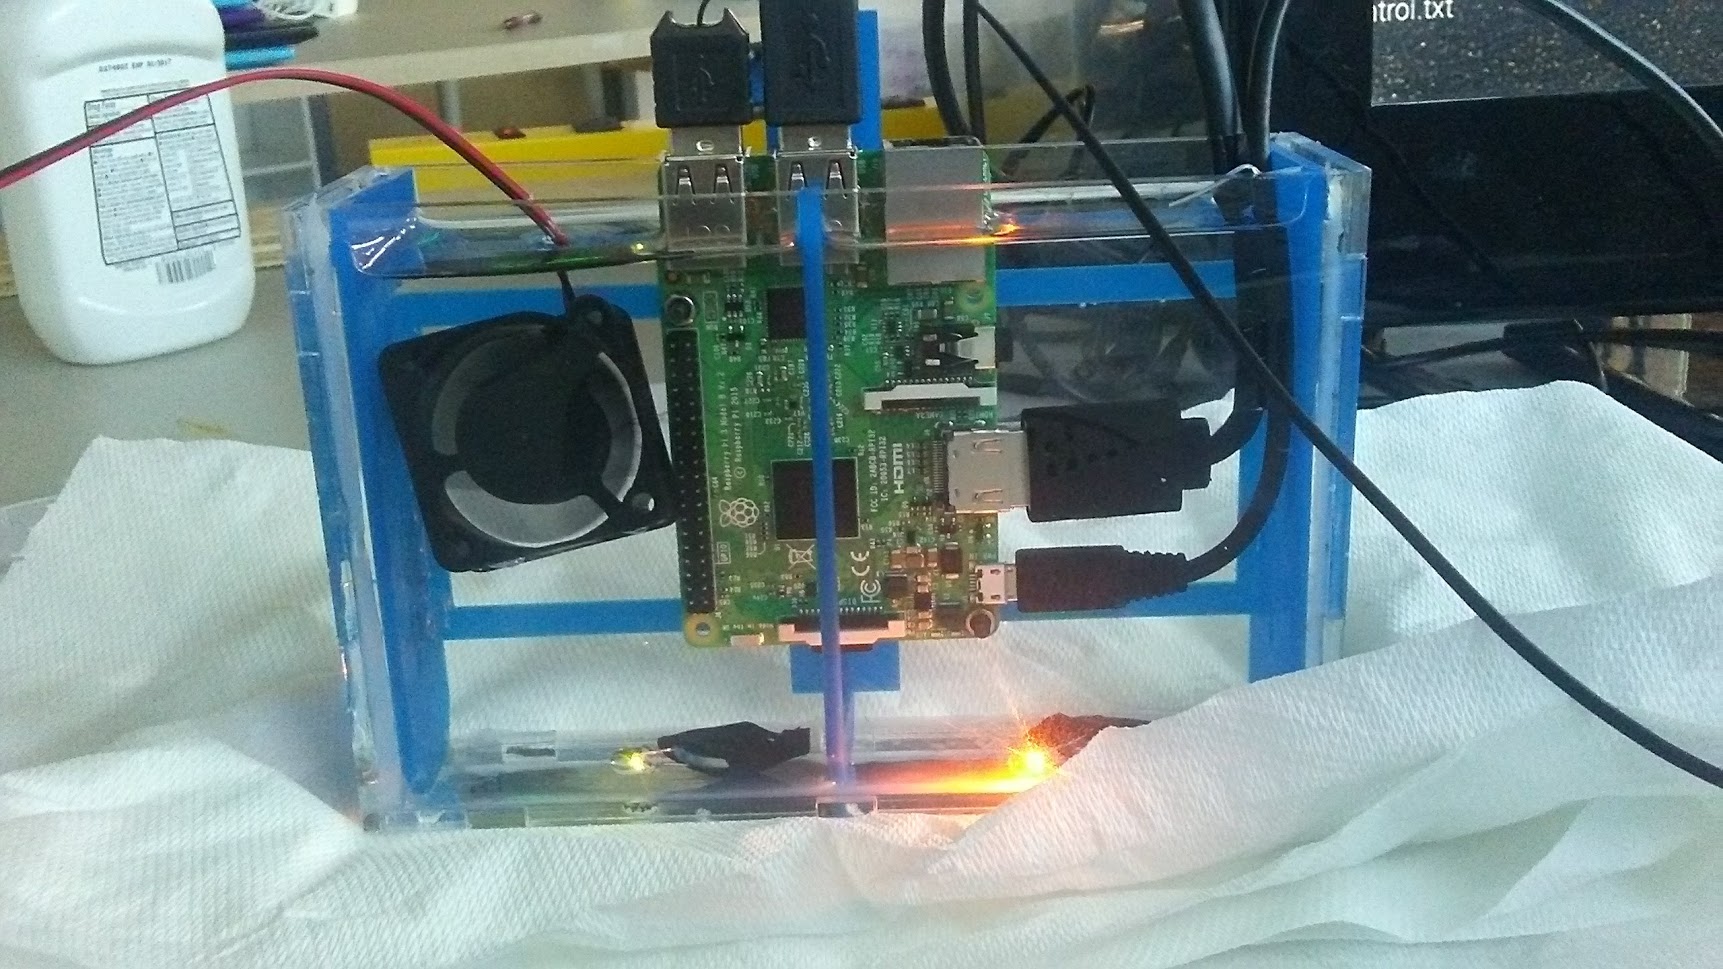 A raspberry pi submerged in mineral oil